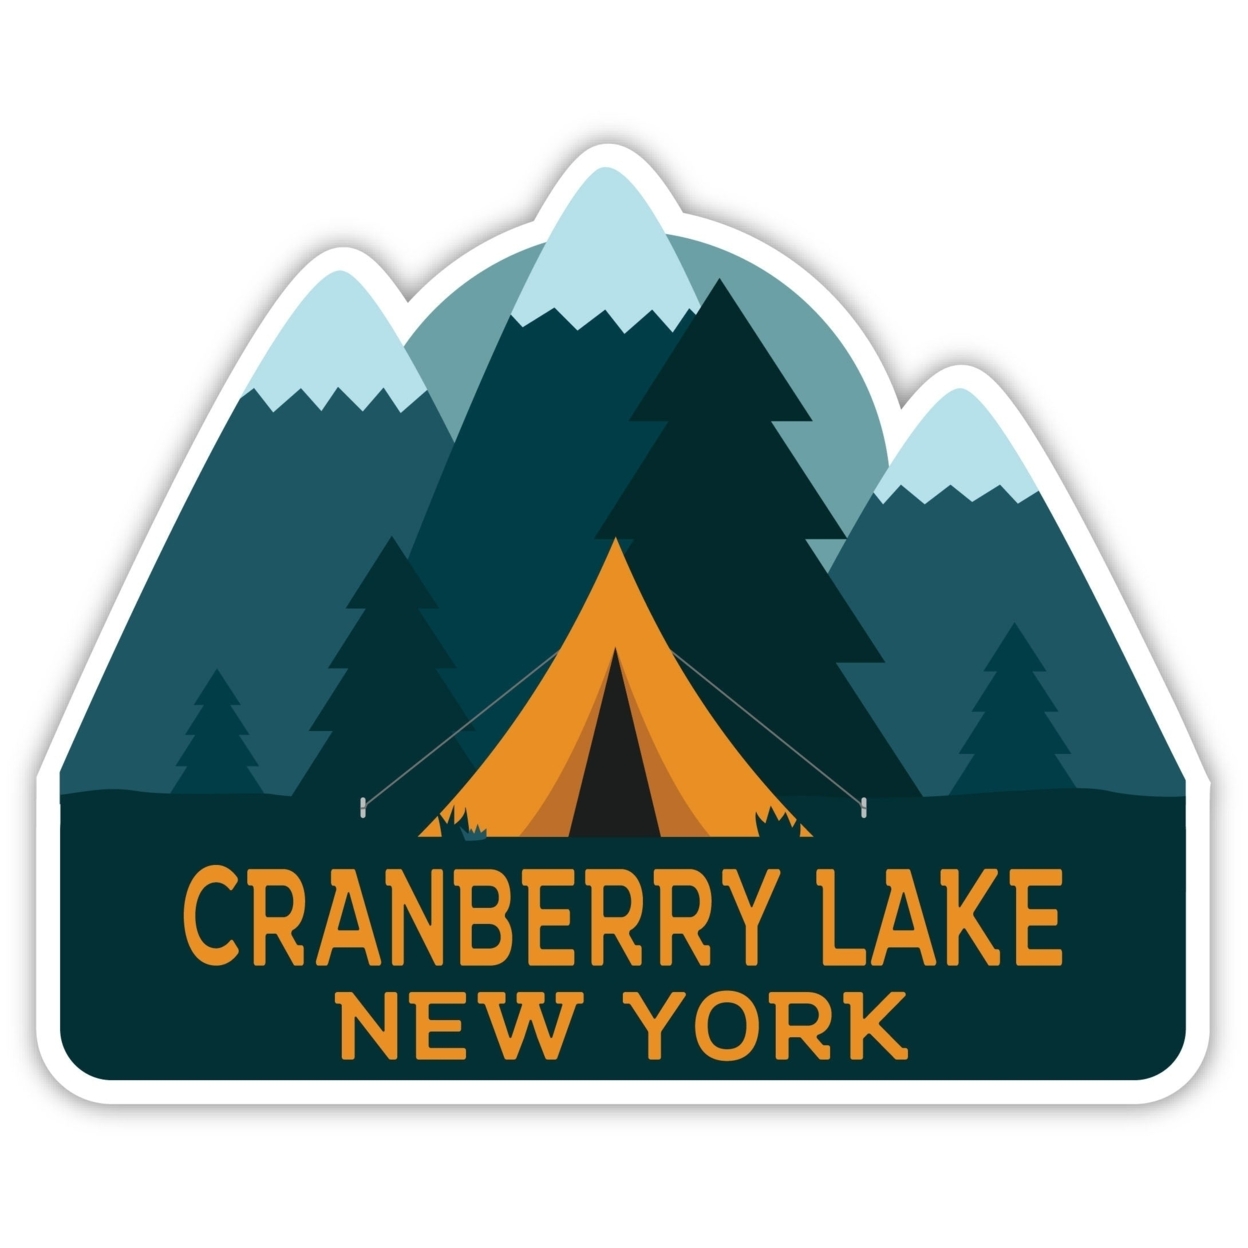 Cranberry Lake New York Souvenir Decorative Stickers (Choose Theme And Size) - 4-Pack, 2-Inch, Camp Life